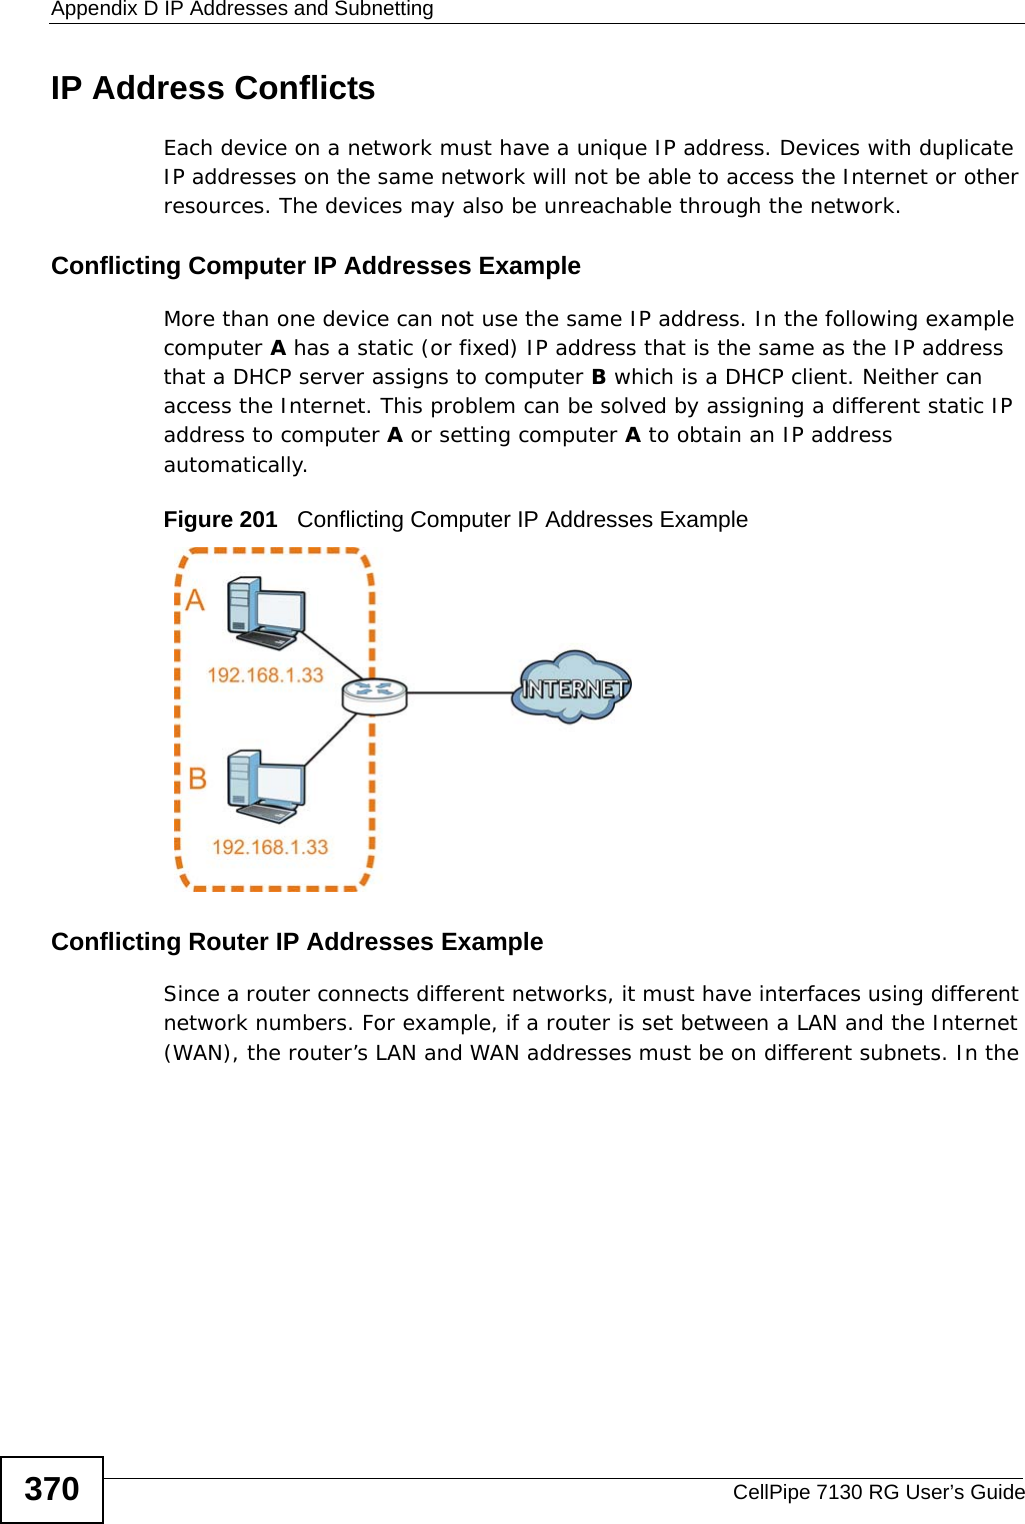 Appendix D IP Addresses and SubnettingCellPipe 7130 RG User’s Guide370IP Address ConflictsEach device on a network must have a unique IP address. Devices with duplicate IP addresses on the same network will not be able to access the Internet or other resources. The devices may also be unreachable through the network. Conflicting Computer IP Addresses ExampleMore than one device can not use the same IP address. In the following example computer A has a static (or fixed) IP address that is the same as the IP address that a DHCP server assigns to computer B which is a DHCP client. Neither can access the Internet. This problem can be solved by assigning a different static IP address to computer A or setting computer A to obtain an IP address automatically.  Figure 201   Conflicting Computer IP Addresses ExampleConflicting Router IP Addresses ExampleSince a router connects different networks, it must have interfaces using different network numbers. For example, if a router is set between a LAN and the Internet (WAN), the router’s LAN and WAN addresses must be on different subnets. In the 